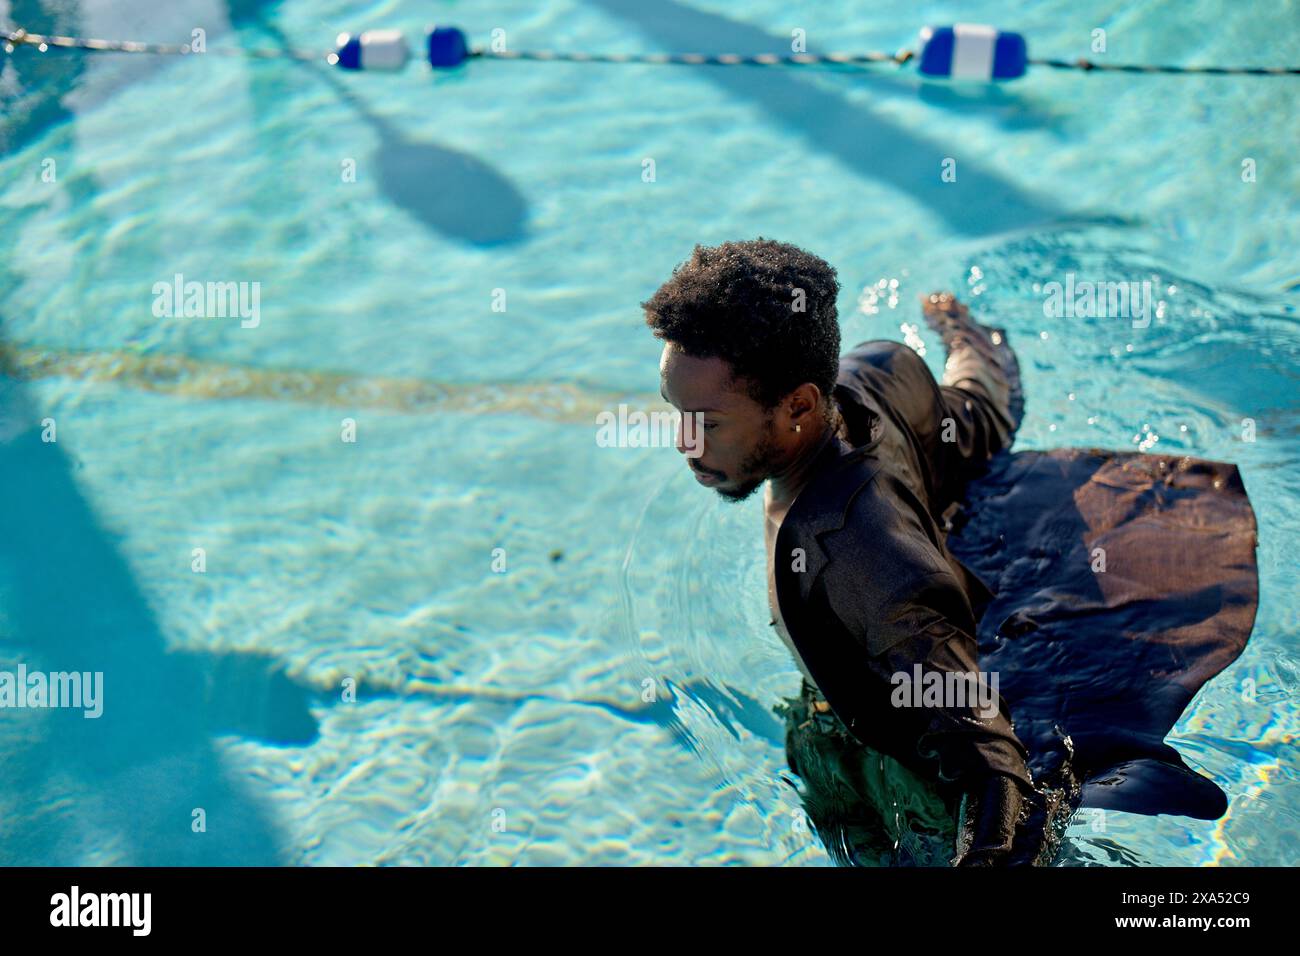 Man swimming in a pool with clothes on during a sunny day. Stock Photo